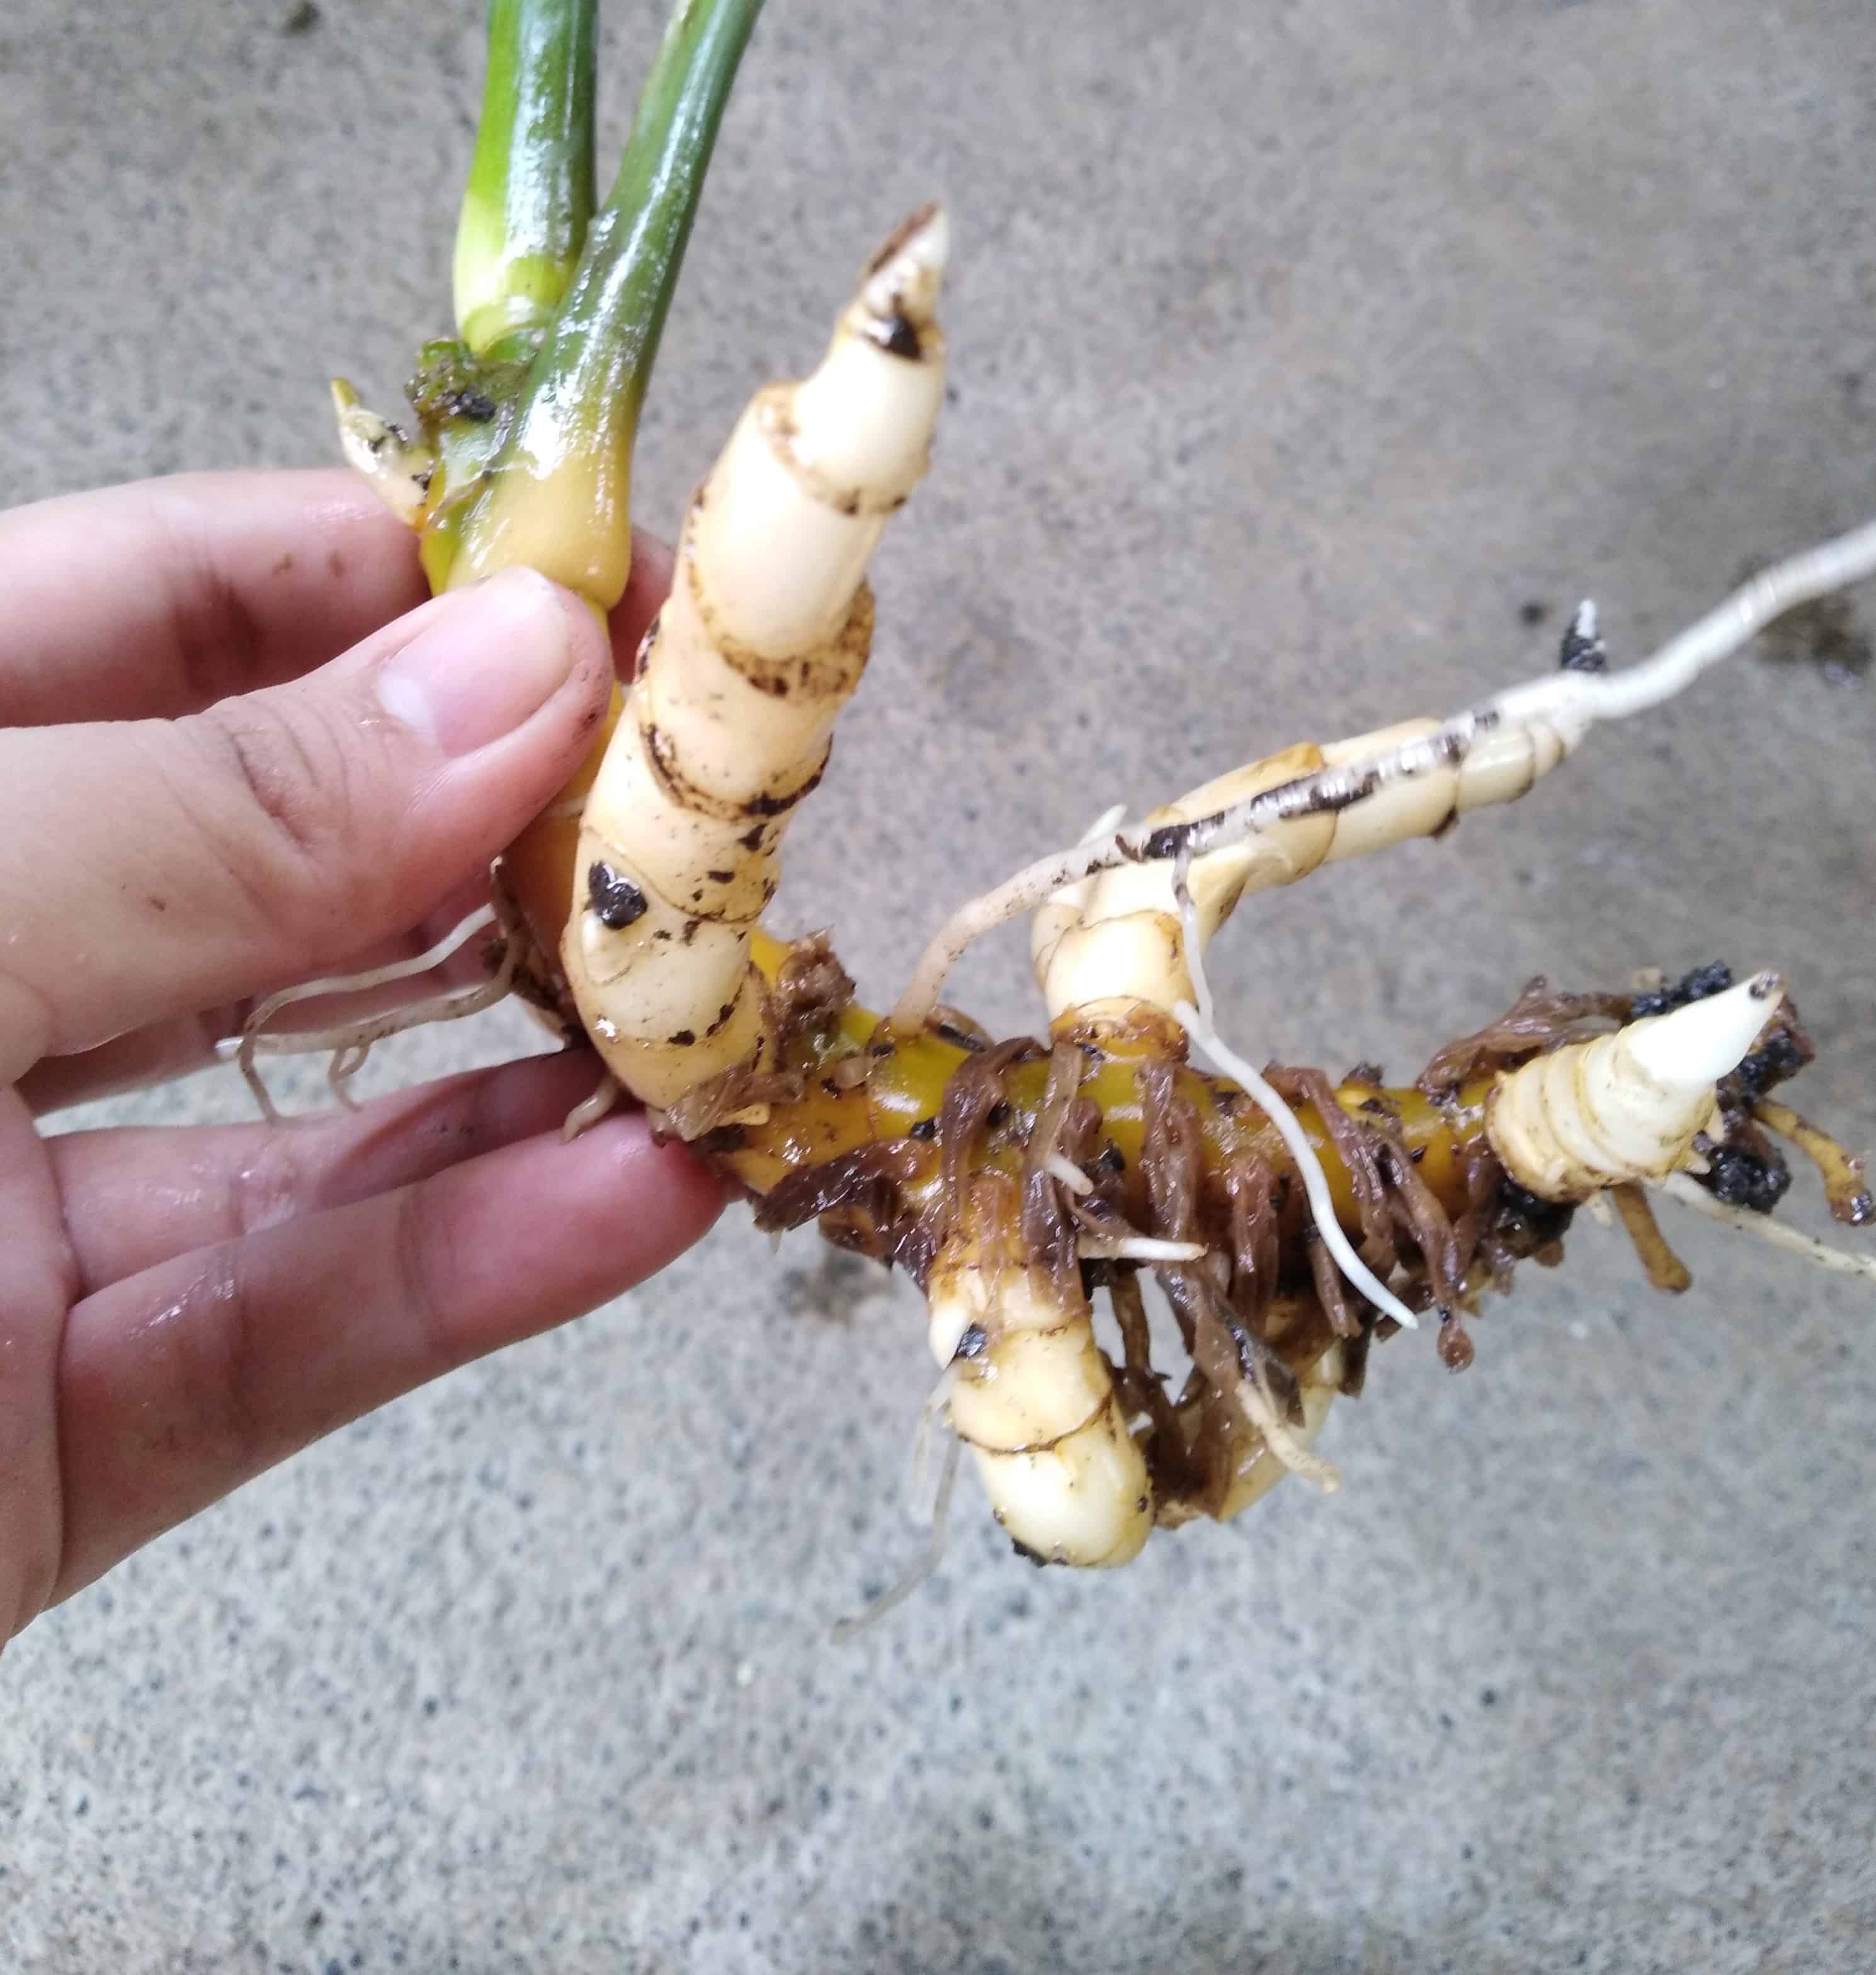 A plant's rhizome with multiple small, dead, and brown roots.